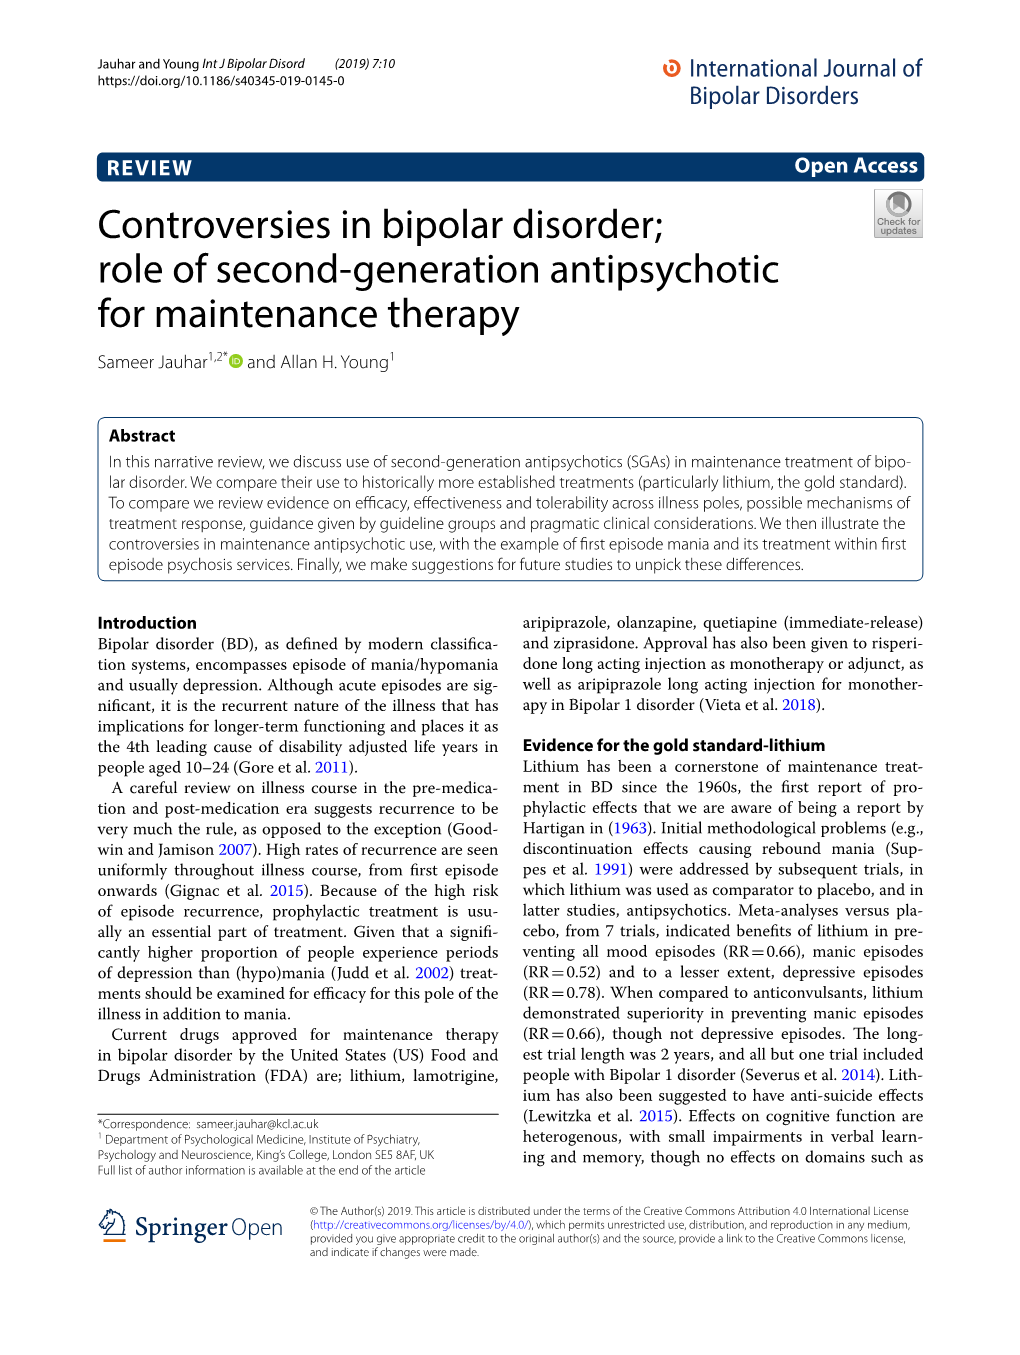 VIEW Open Access Controversies in Bipolar Disorder; Role of Second‑Generation Antipsychotic for Maintenance Therapy Sameer Jauhar1,2* and Allan H